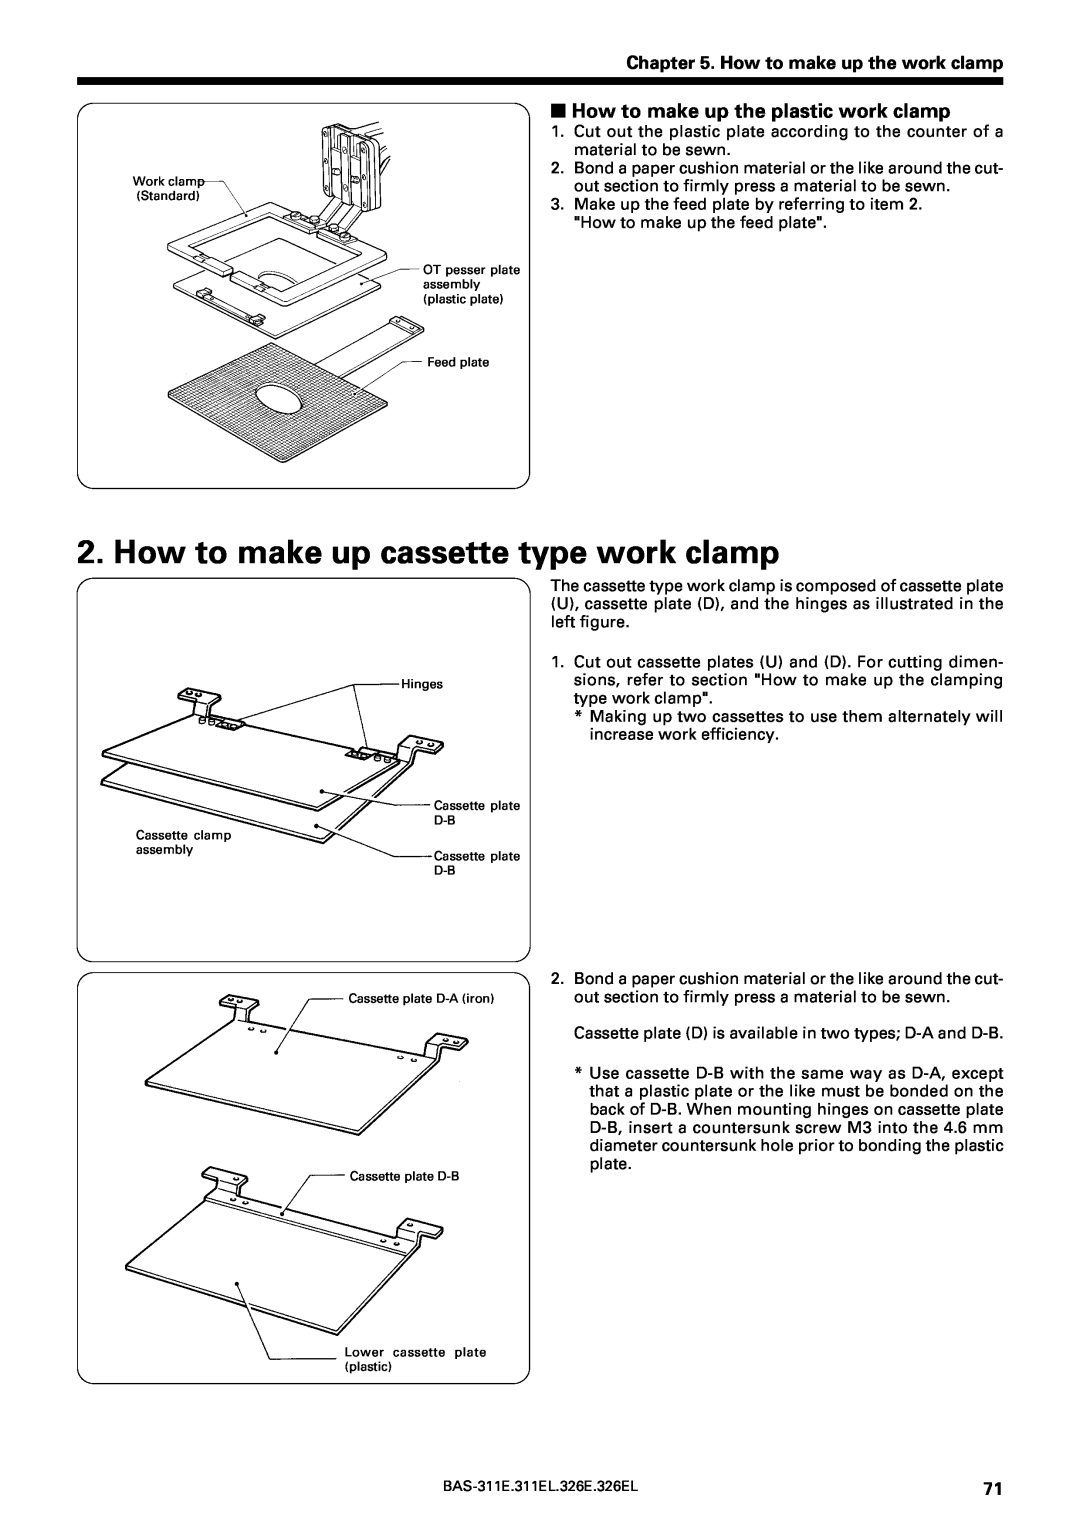 Brother BAS-311E service manual How to make up cassette type work clamp, How to make up the plastic work clamp 